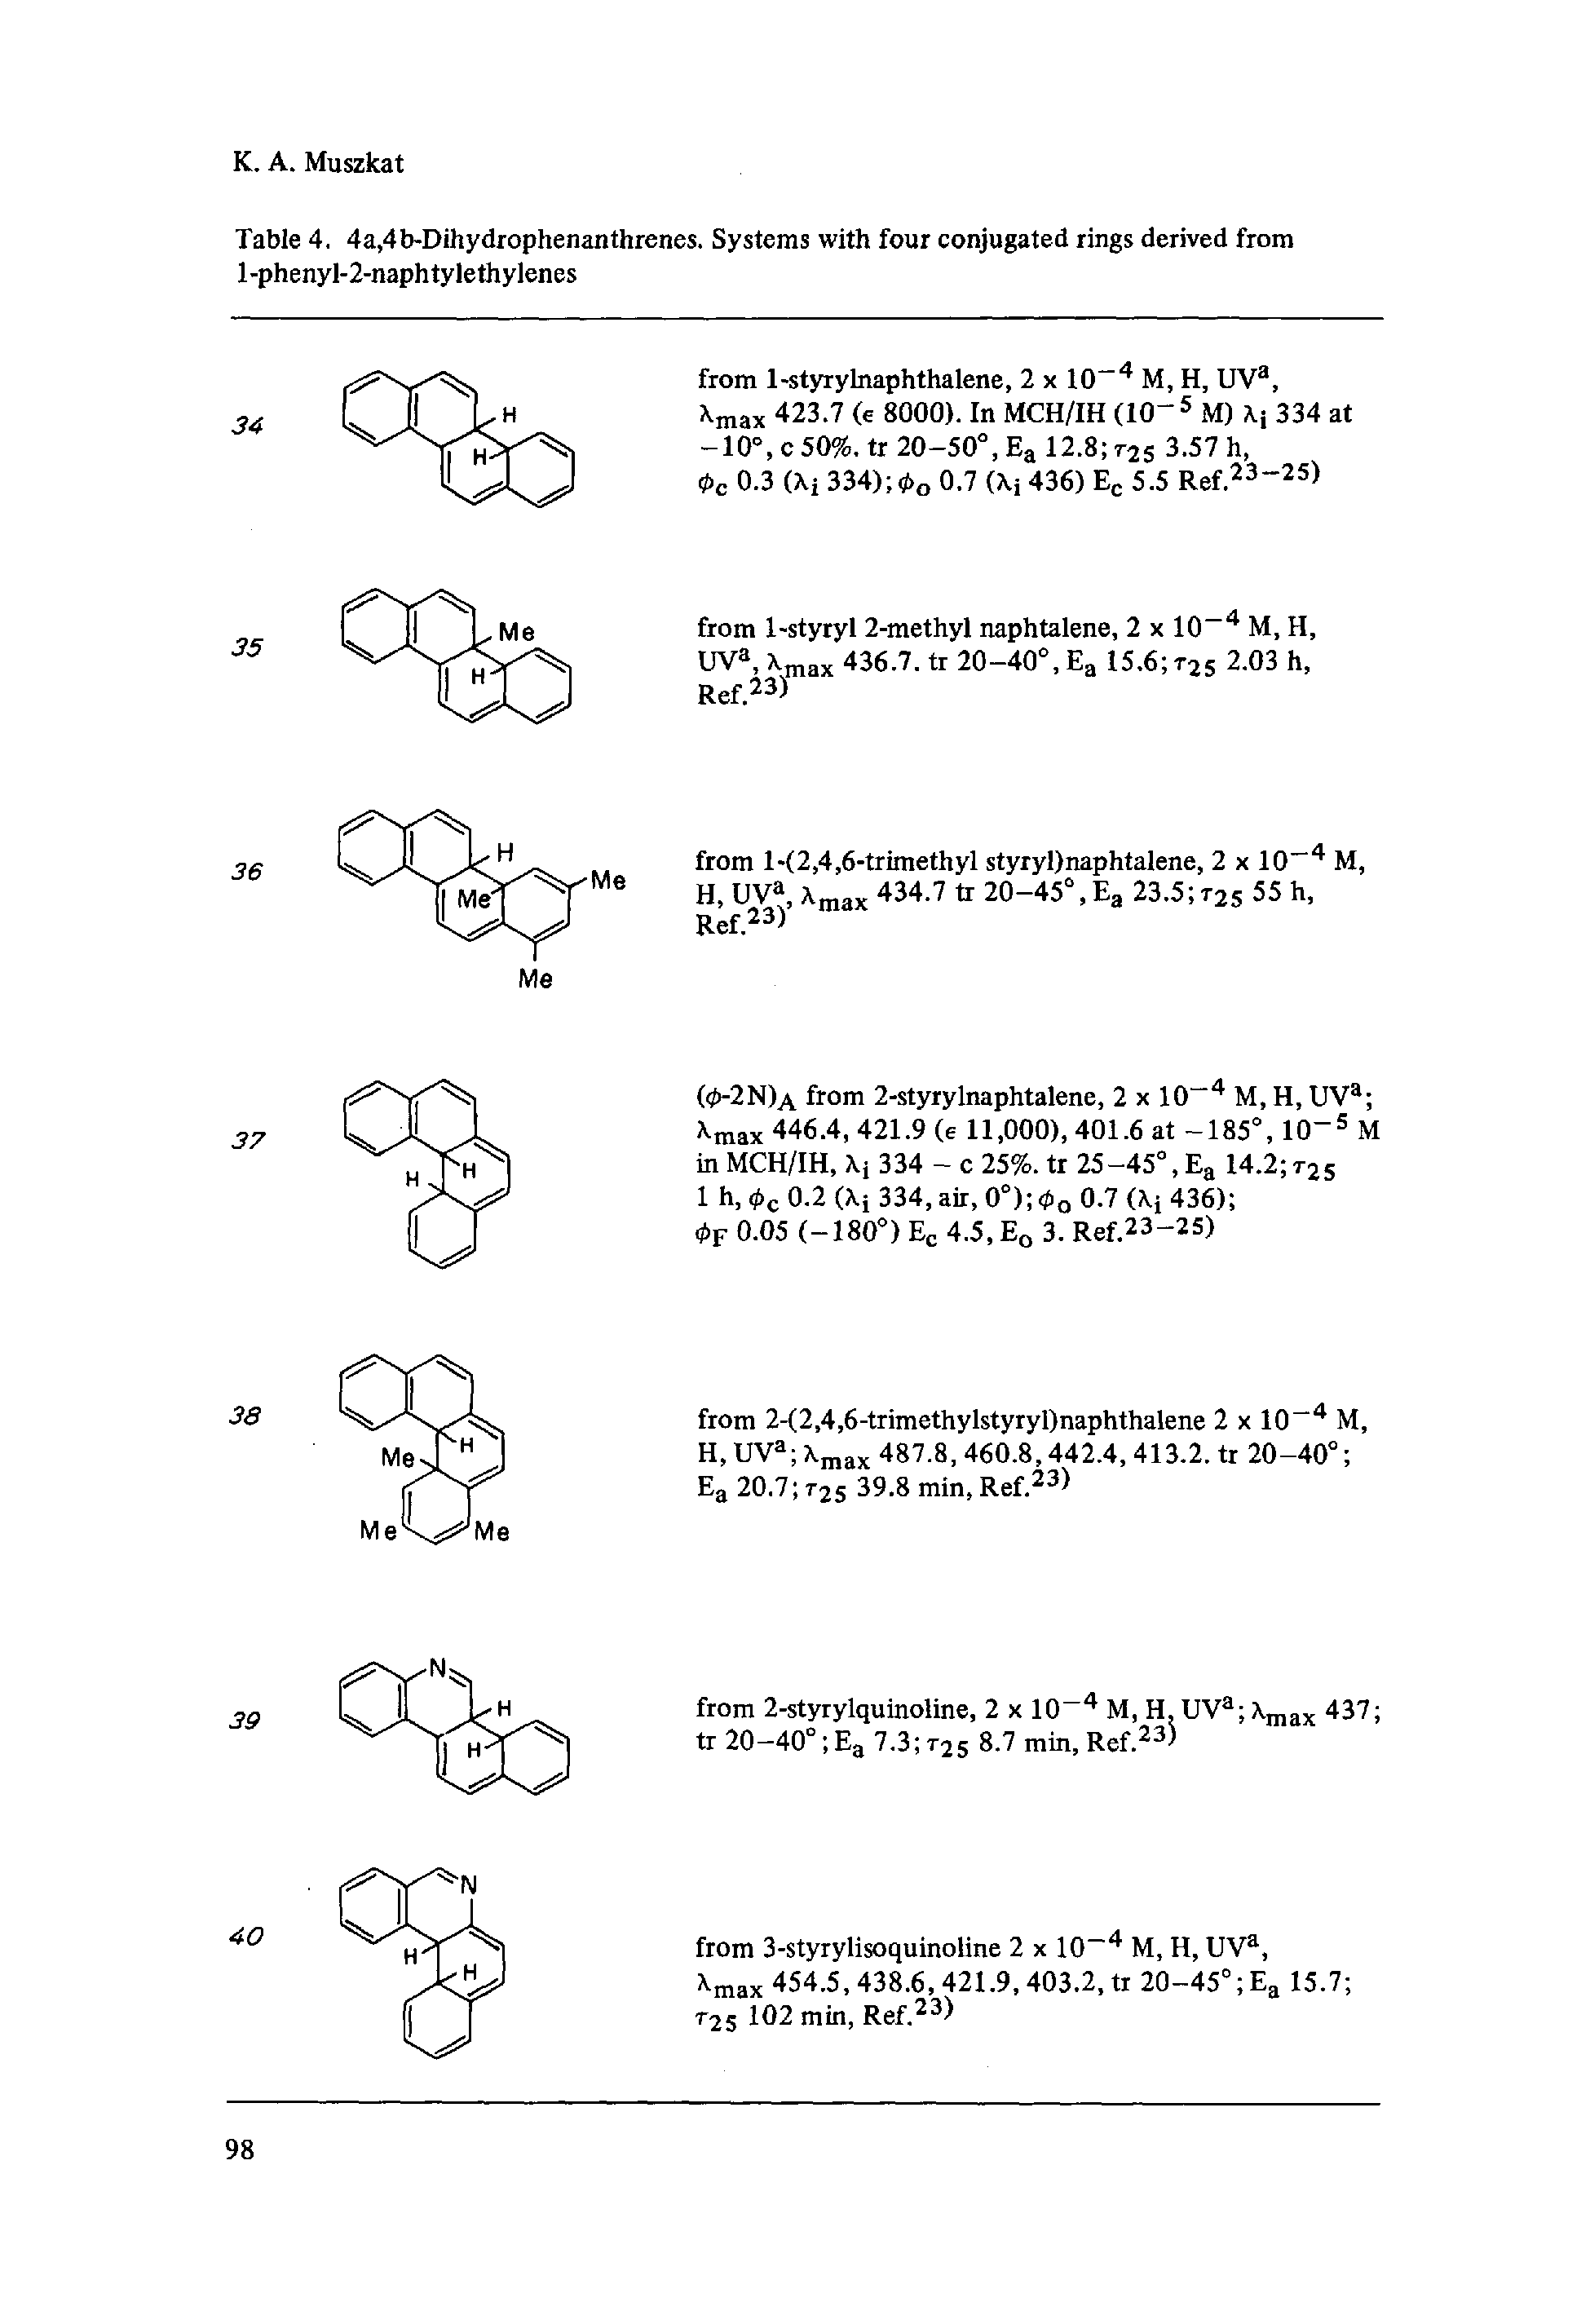 Table 4. 4a,4b-Dihydrophenanthrenes. Systems with four conjugated rings derived from 1-phenyl-2-naphtylethylenes...